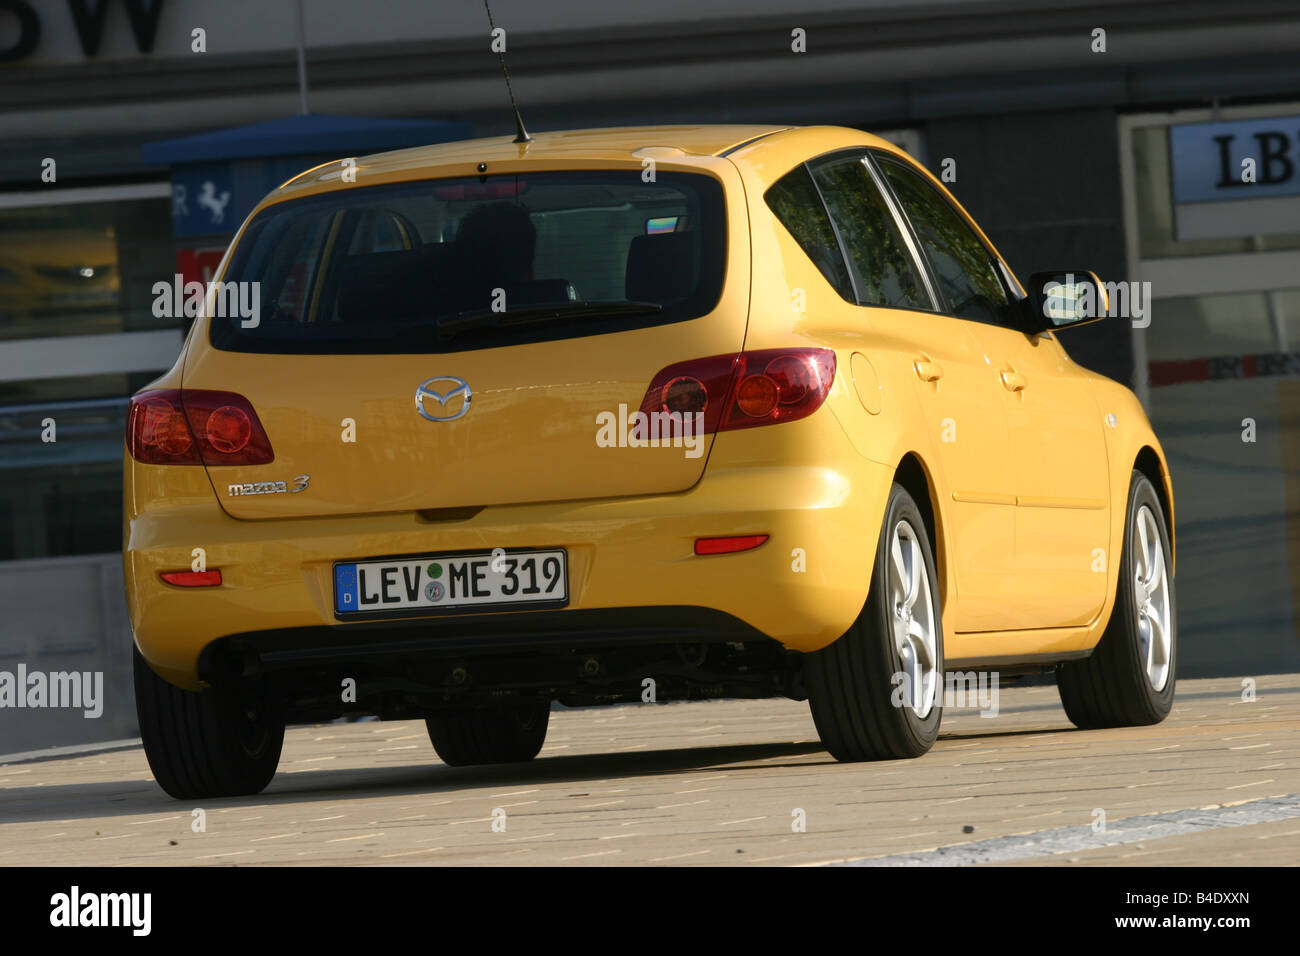 Car, Mazda 3 Sport 1.6, Lower middle-sized class, Limousine, model year 2003-, FGHDS, yellow, diagonal from the back, rear view, Stock Photo